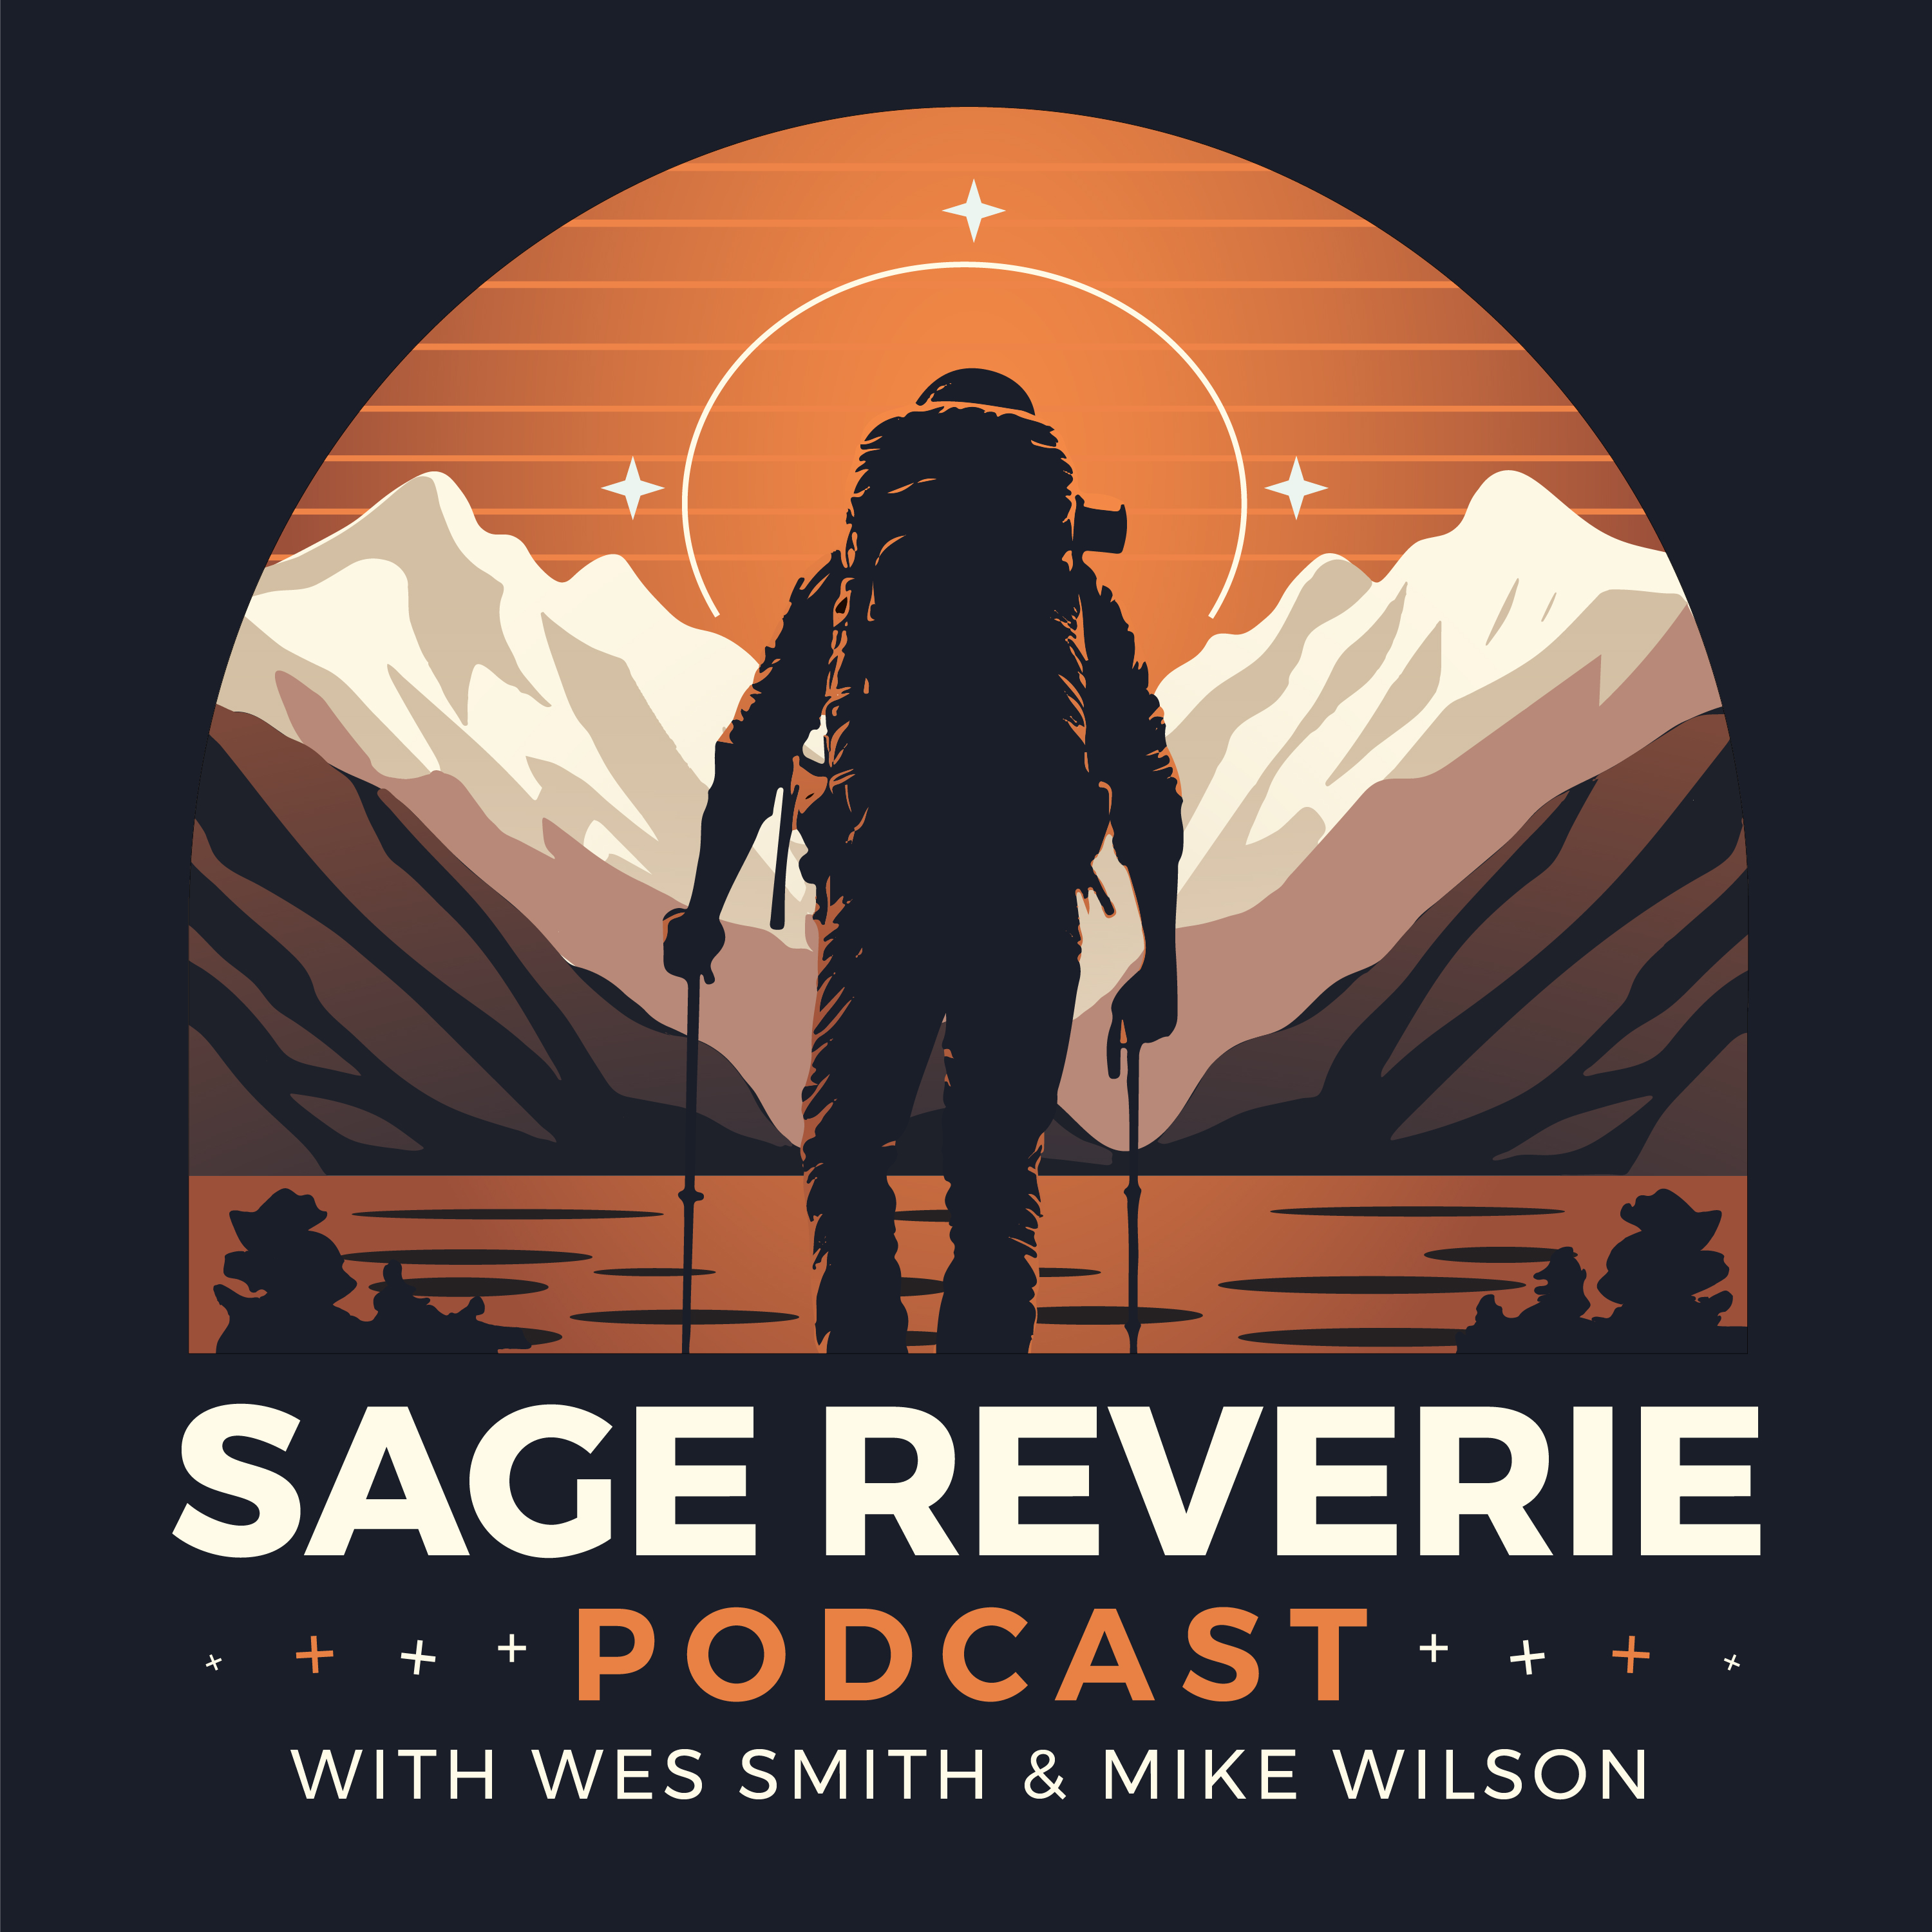 Biblical Conspiracy Theories | Sage Reverie Podcast Ep. 11